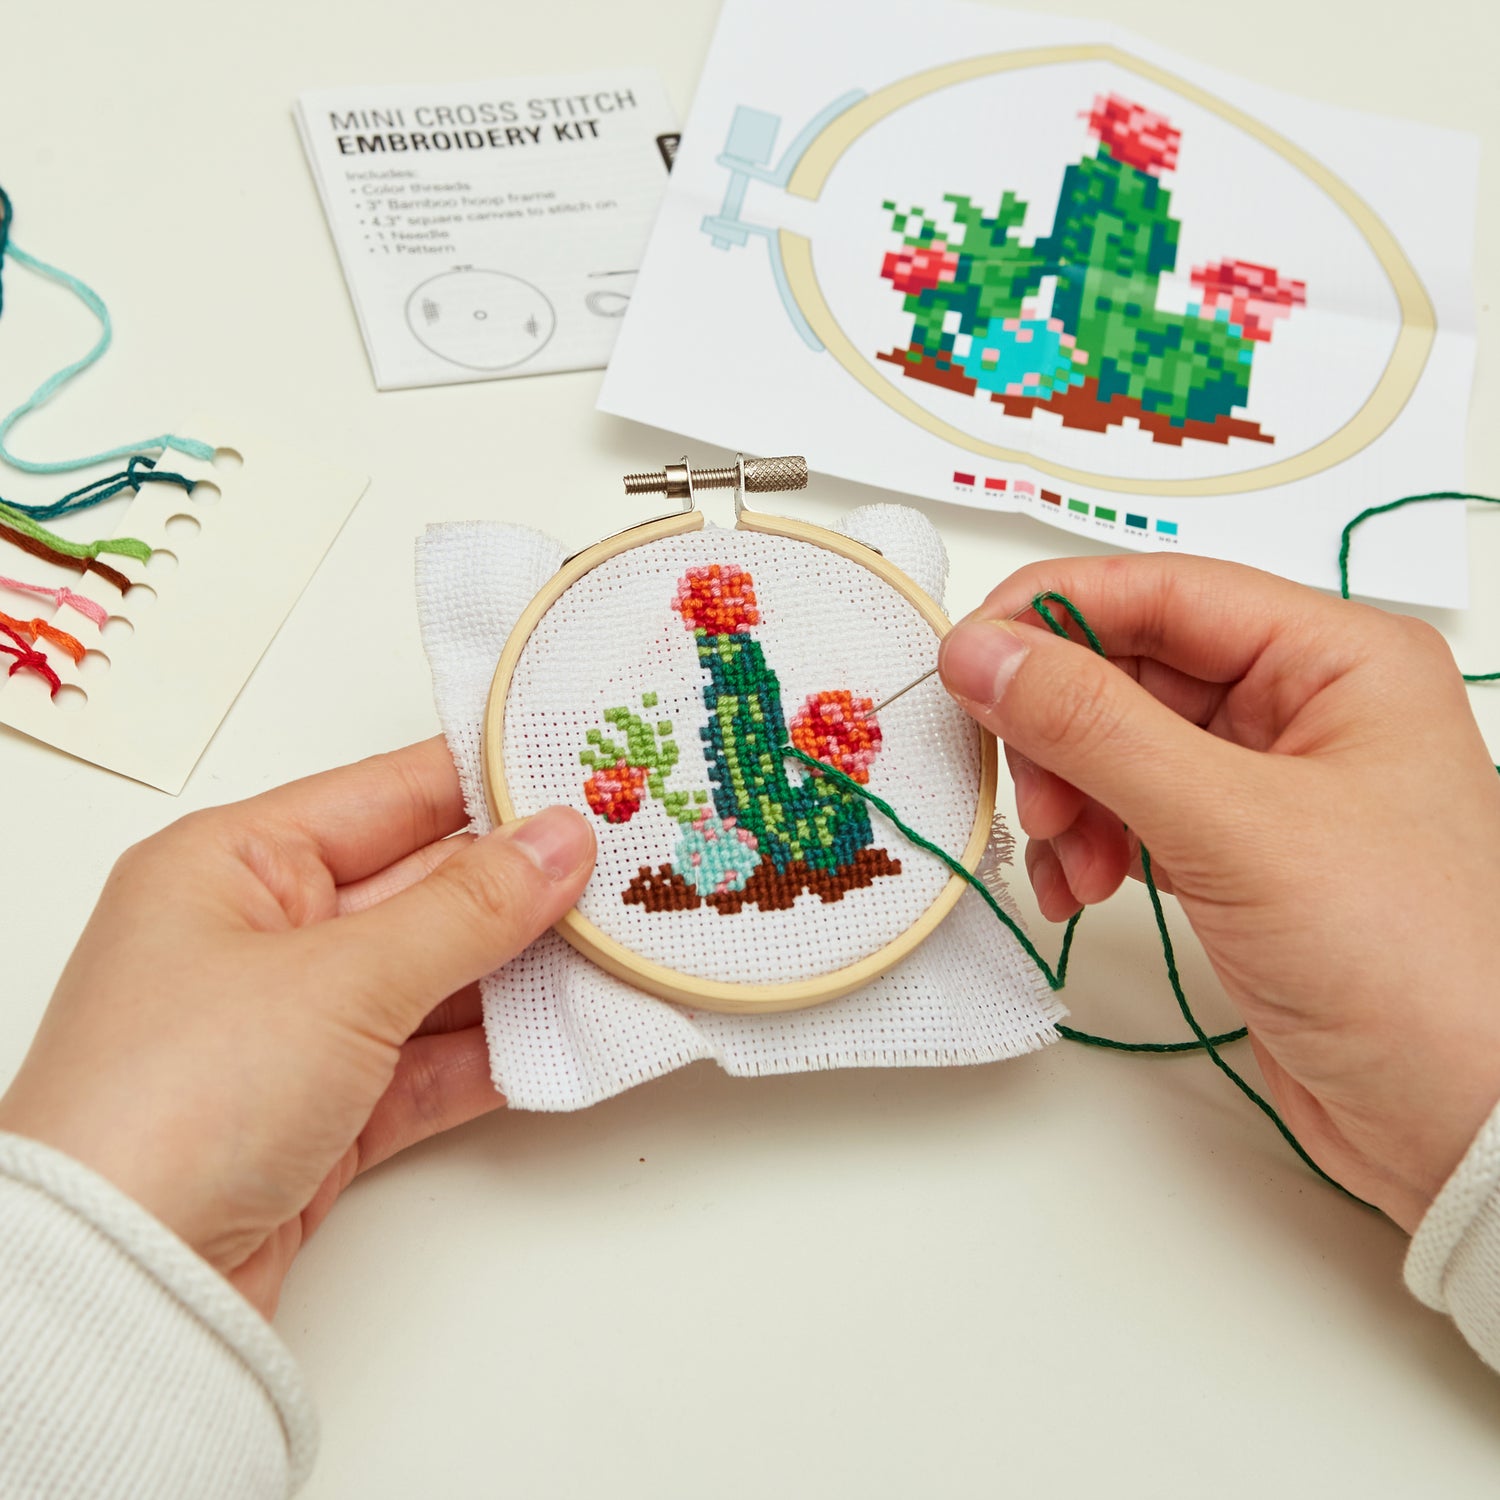 Sweet Mini Embroidery Kit - 4 Stitched In Thread 